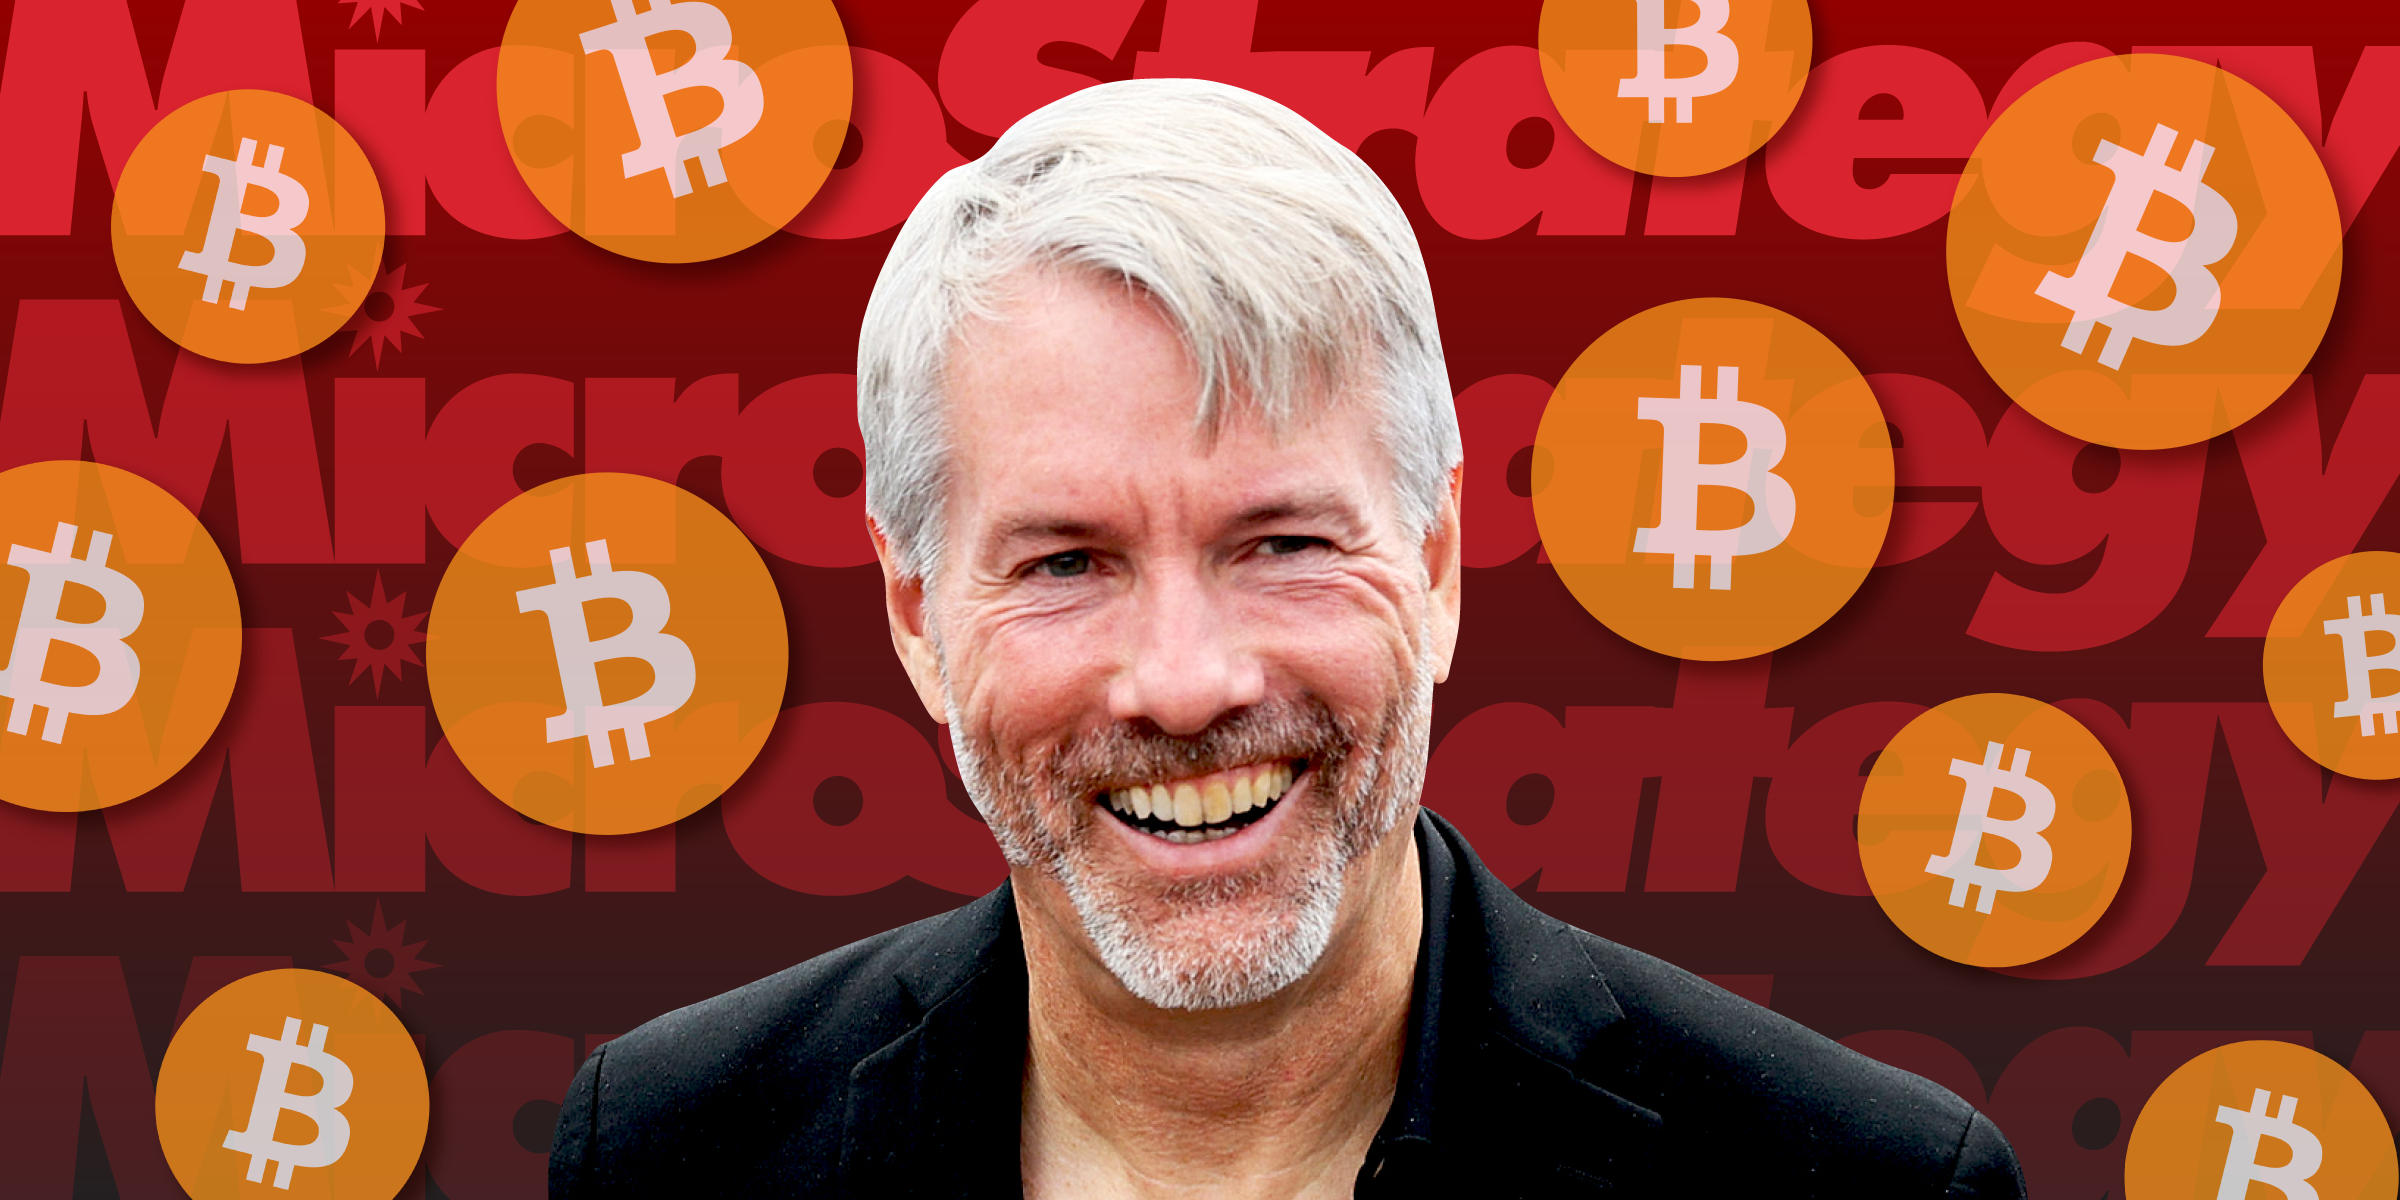 Michael Saylor, co-founder of MicroStrategy, with Bitcoin logos scattered behind him on a red-to-black gradient background